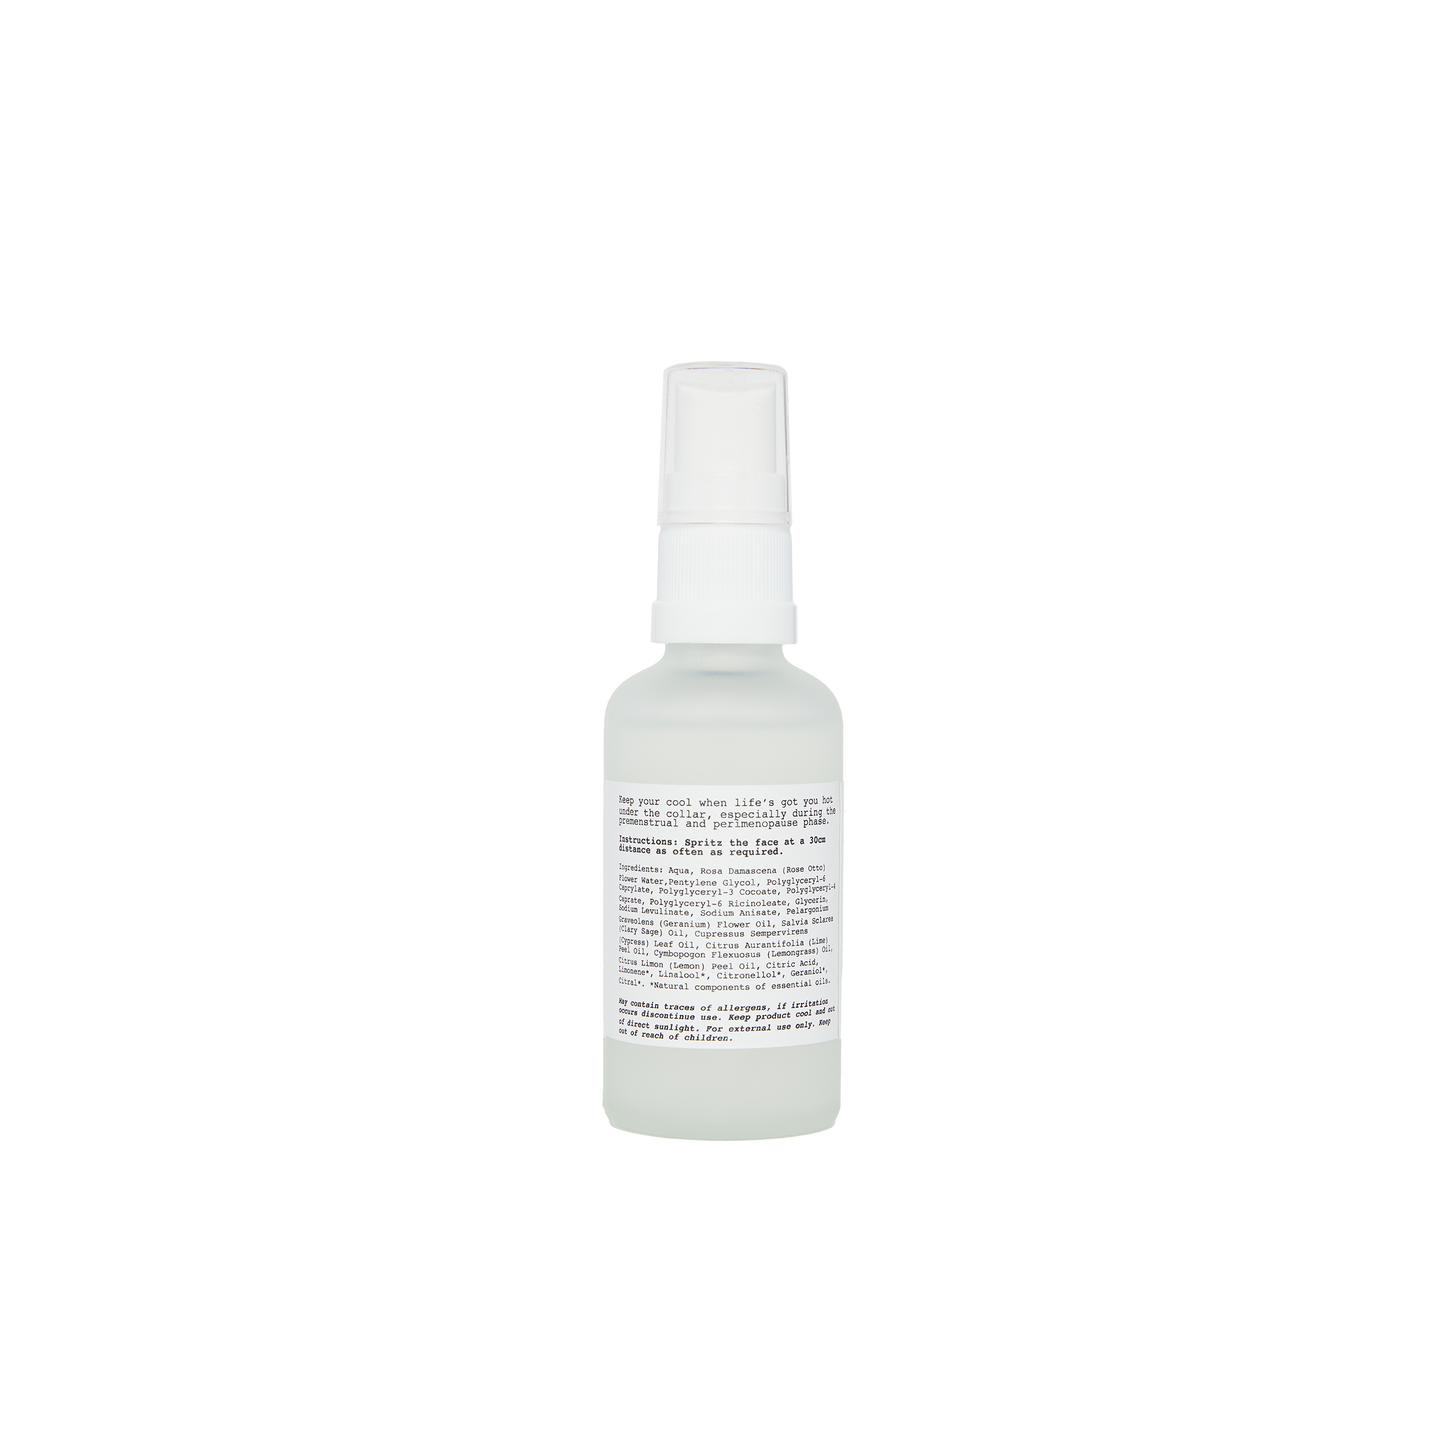 Cool and calm menopause hot flush mist. In a frosted clear bottle with a white label and white pump, view of the back of the bottle, with the ingredients listed on the white label.